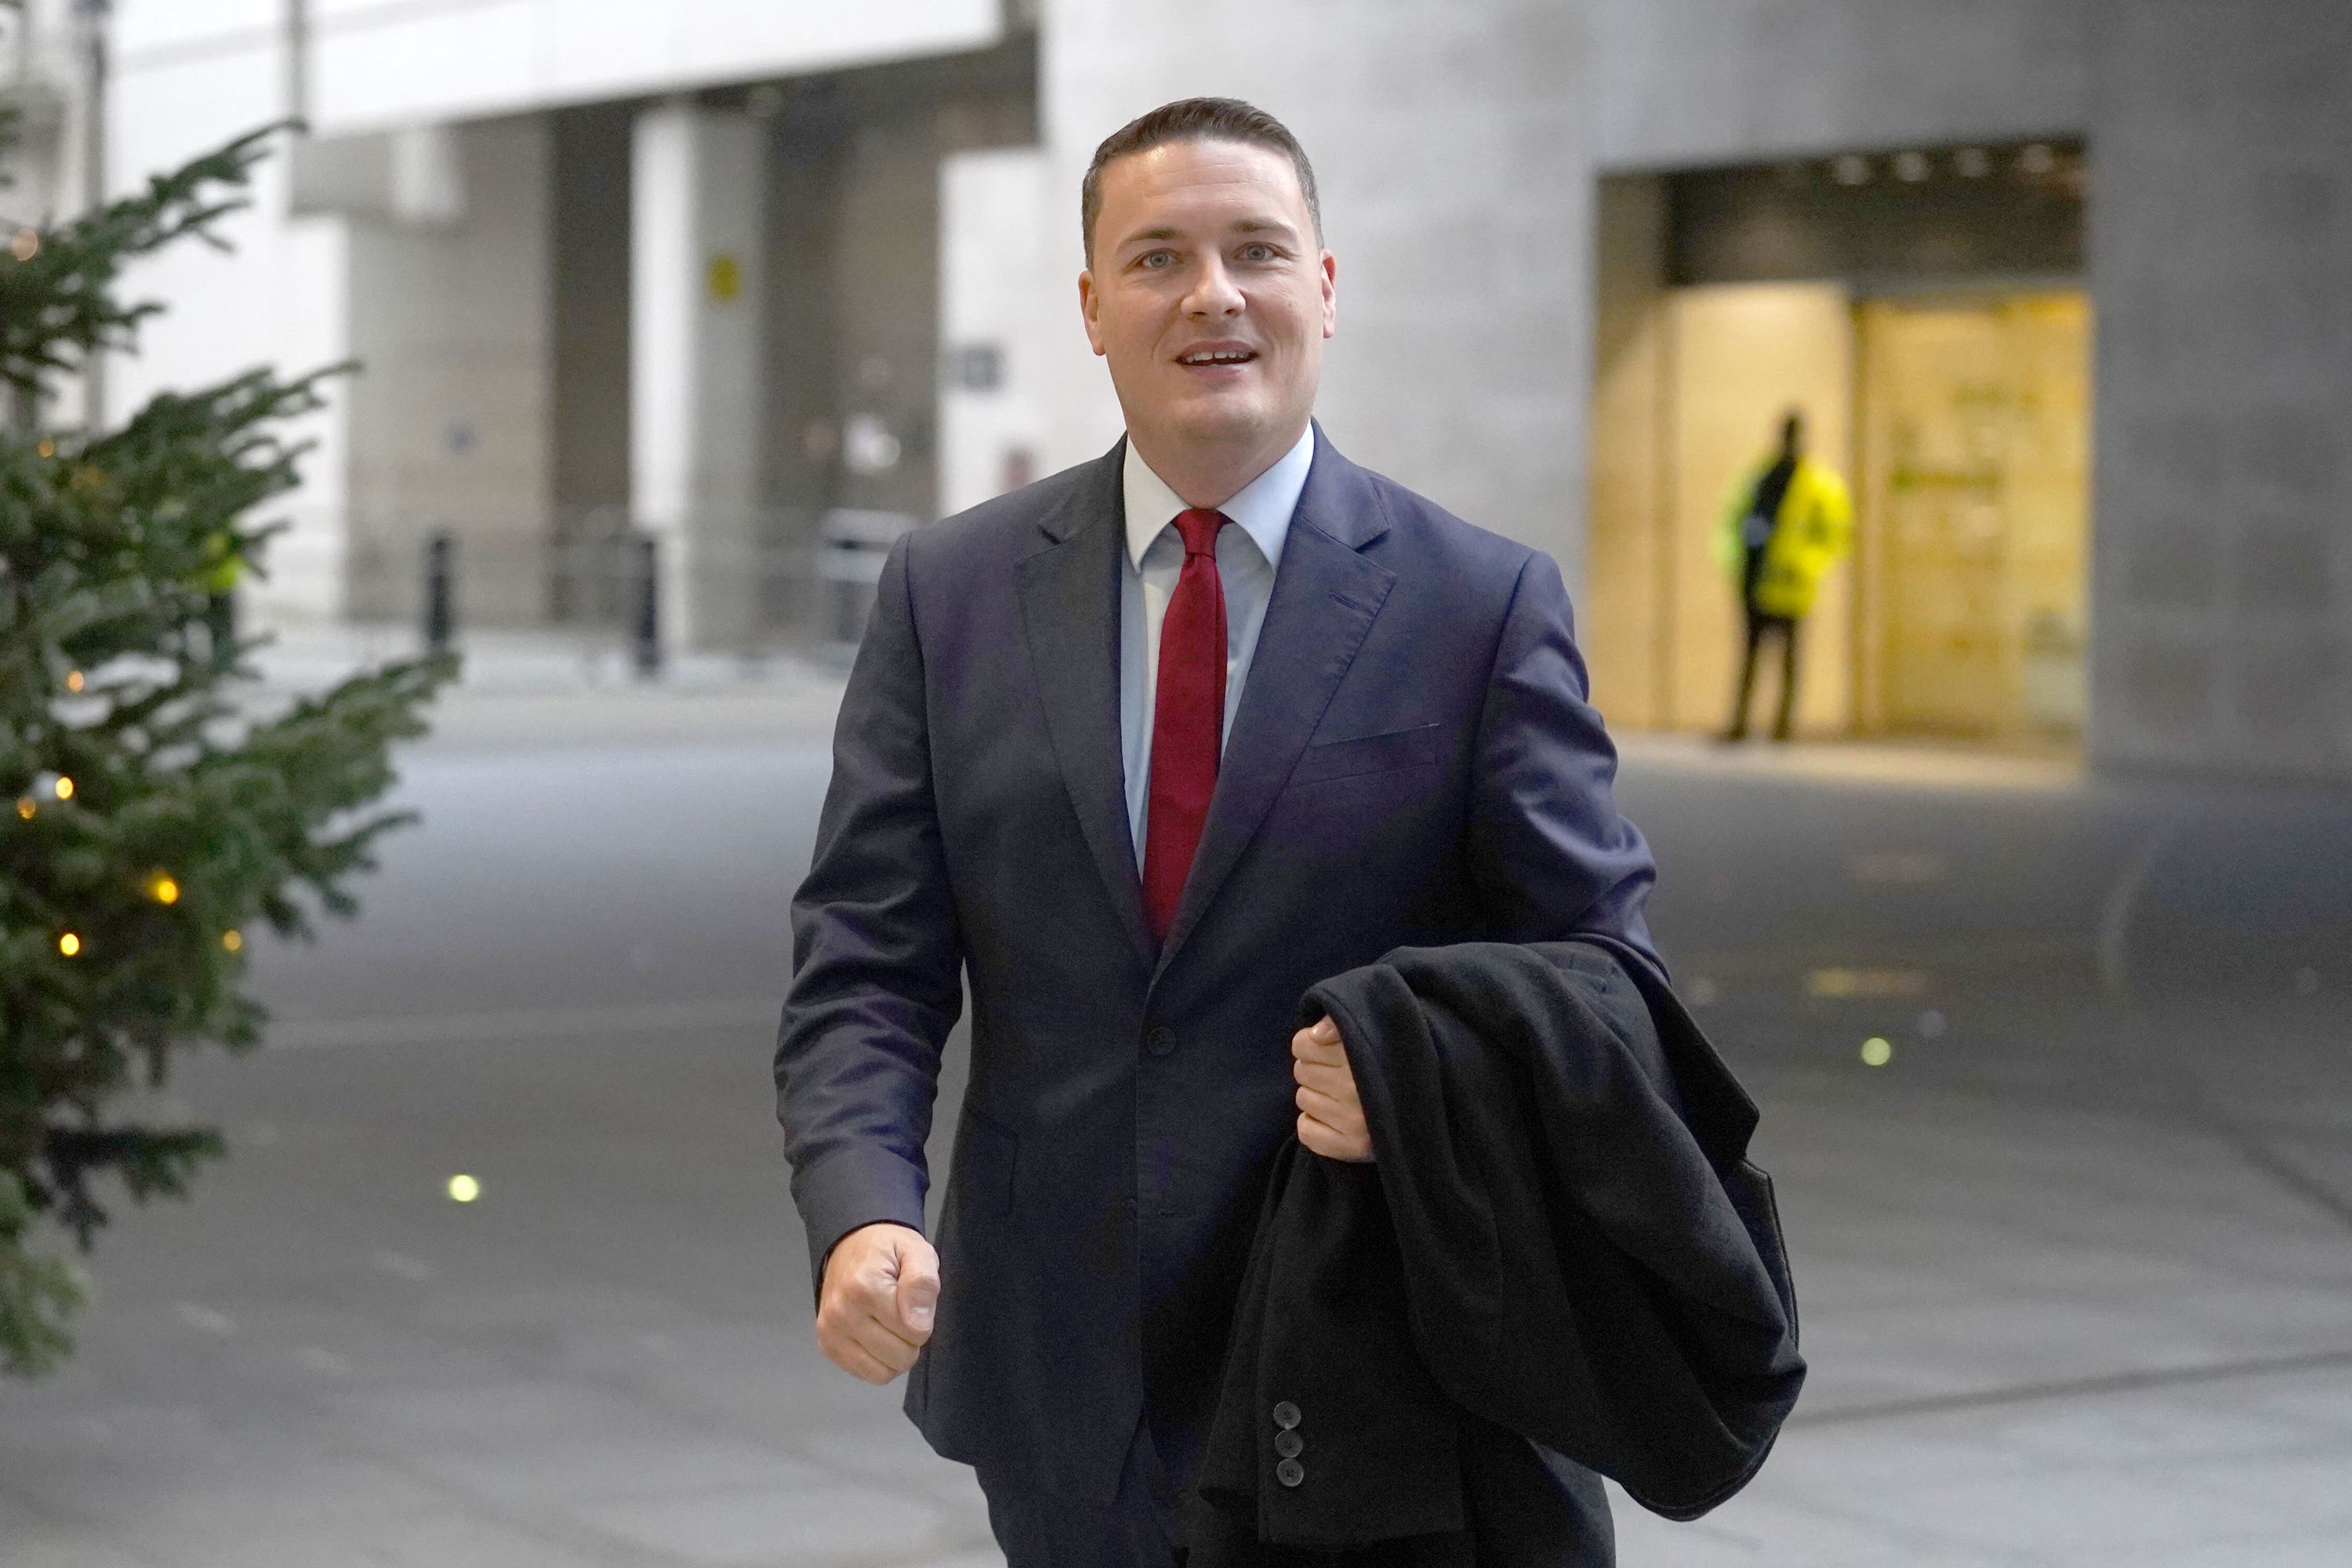 Shadow health secretary Wes Streeting said delays in the cancer sector are often a ‘sign that things are going wrong in the NHS’ (Stefan Rousseau/PA)